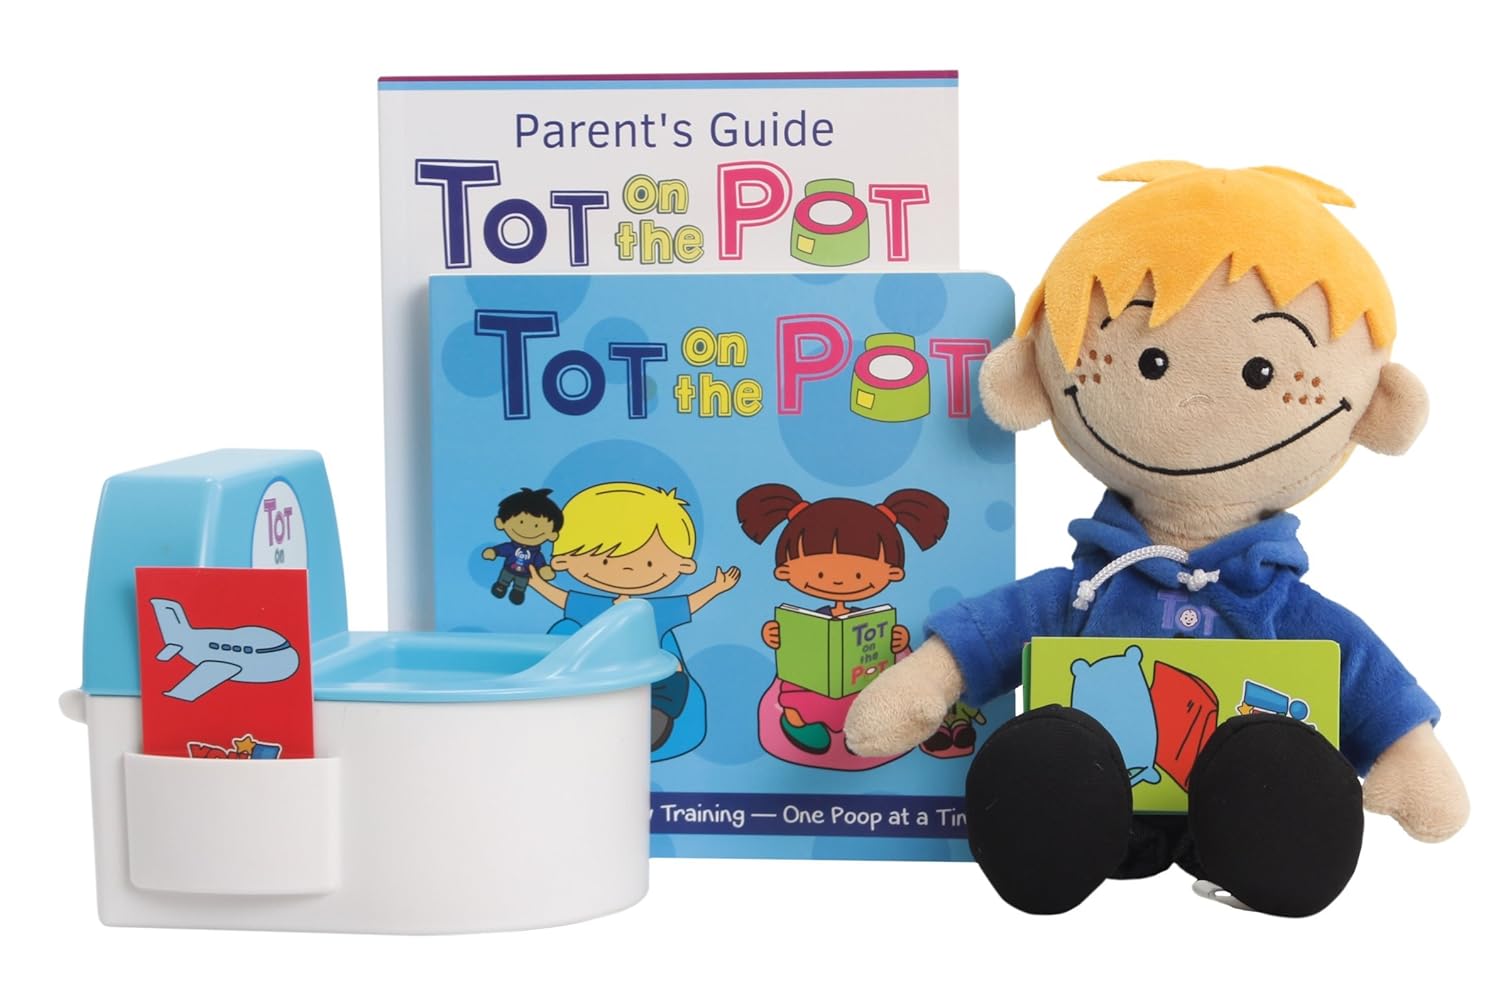 Tot on the Pot is an all-inclusive, play-based potty training system